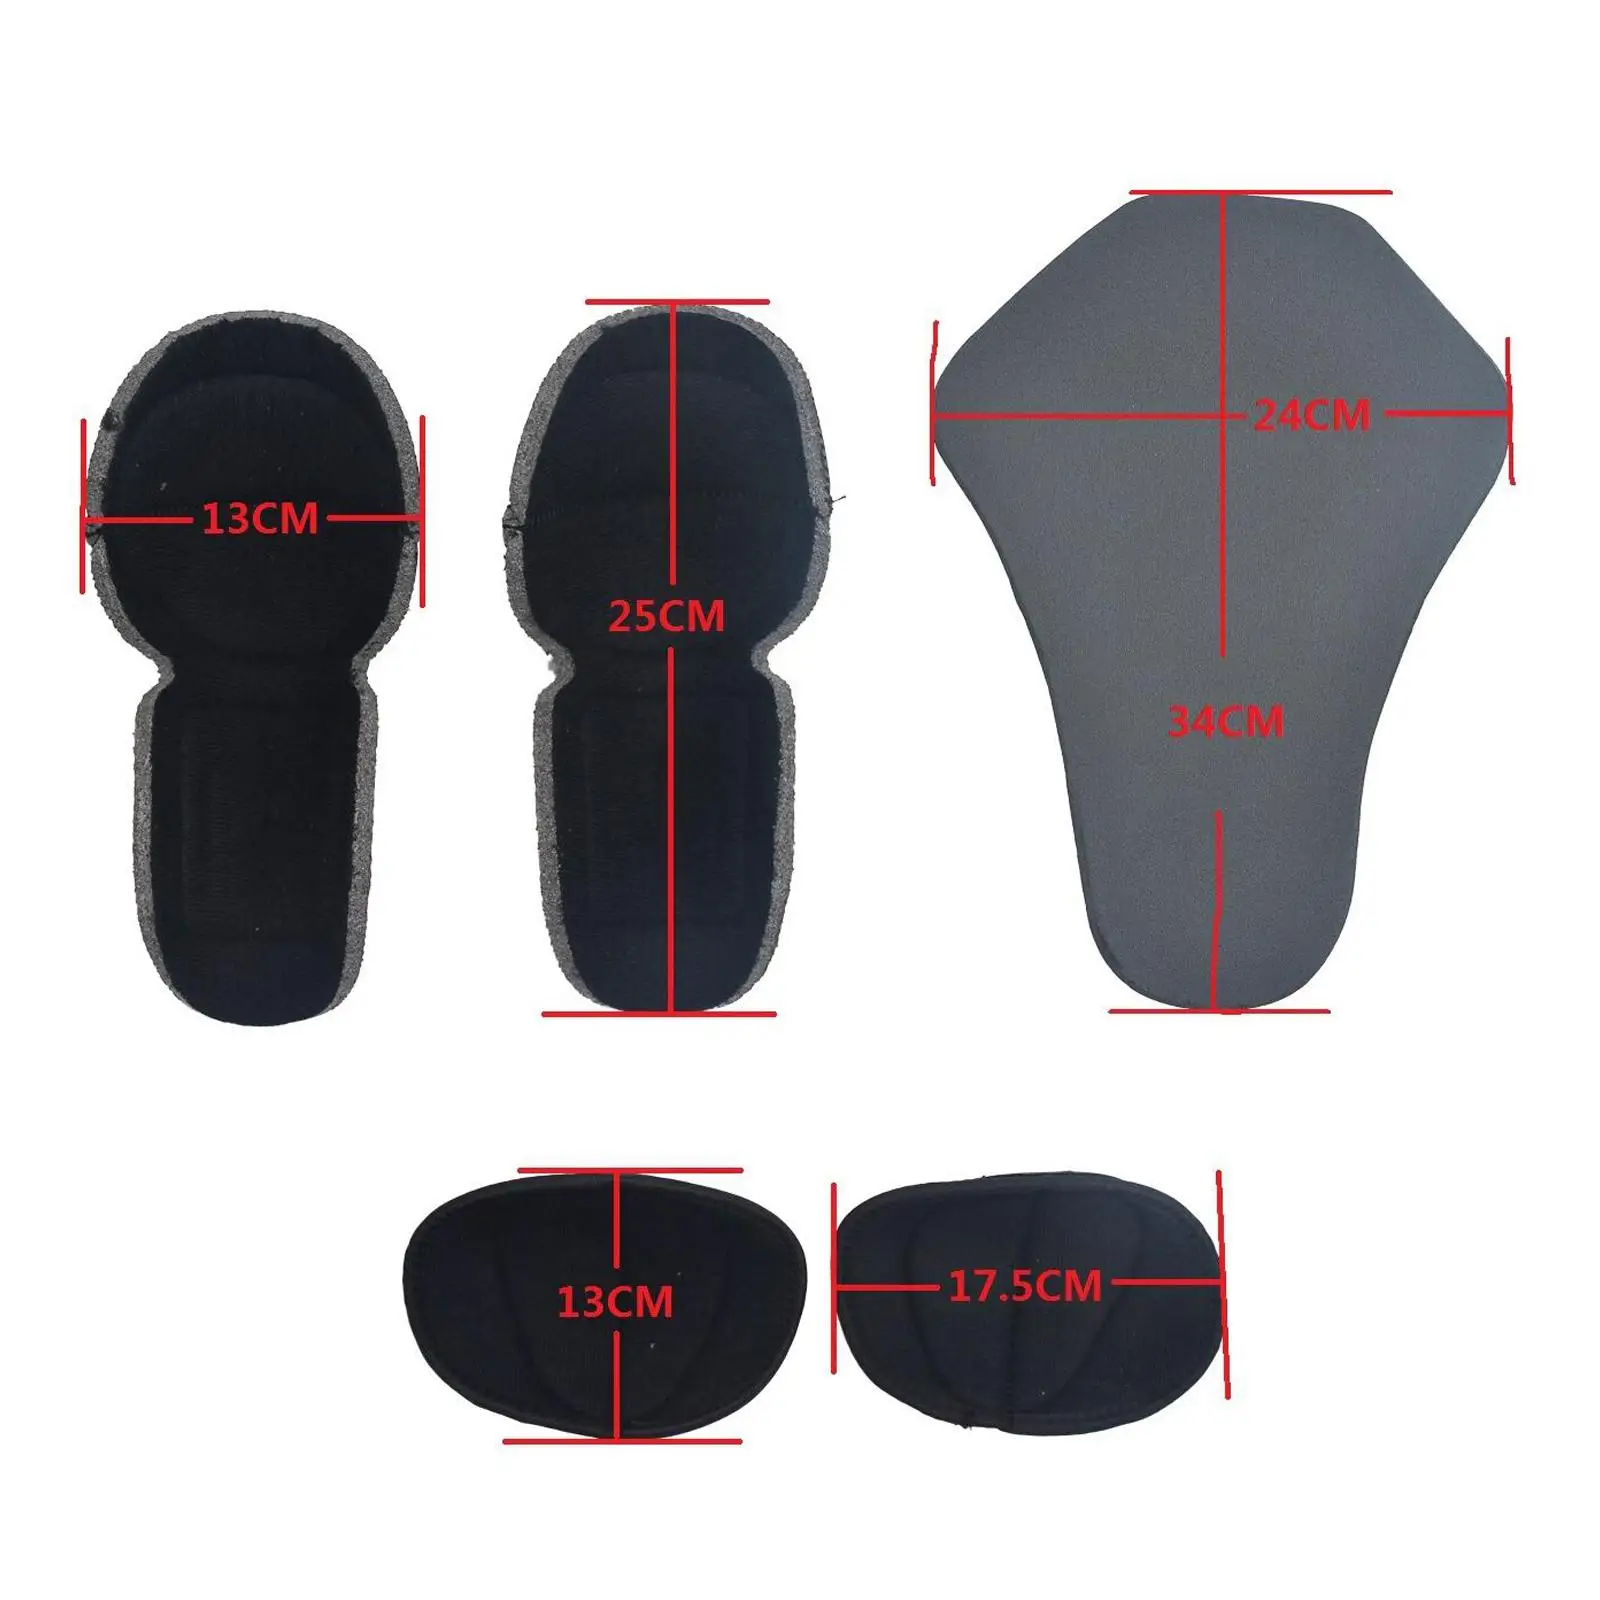 5Pieces Riding Shoulder Protector Removable Motorcycle Accessories Motorcycle Protective Gear Set Racing Guard Fit for Riding